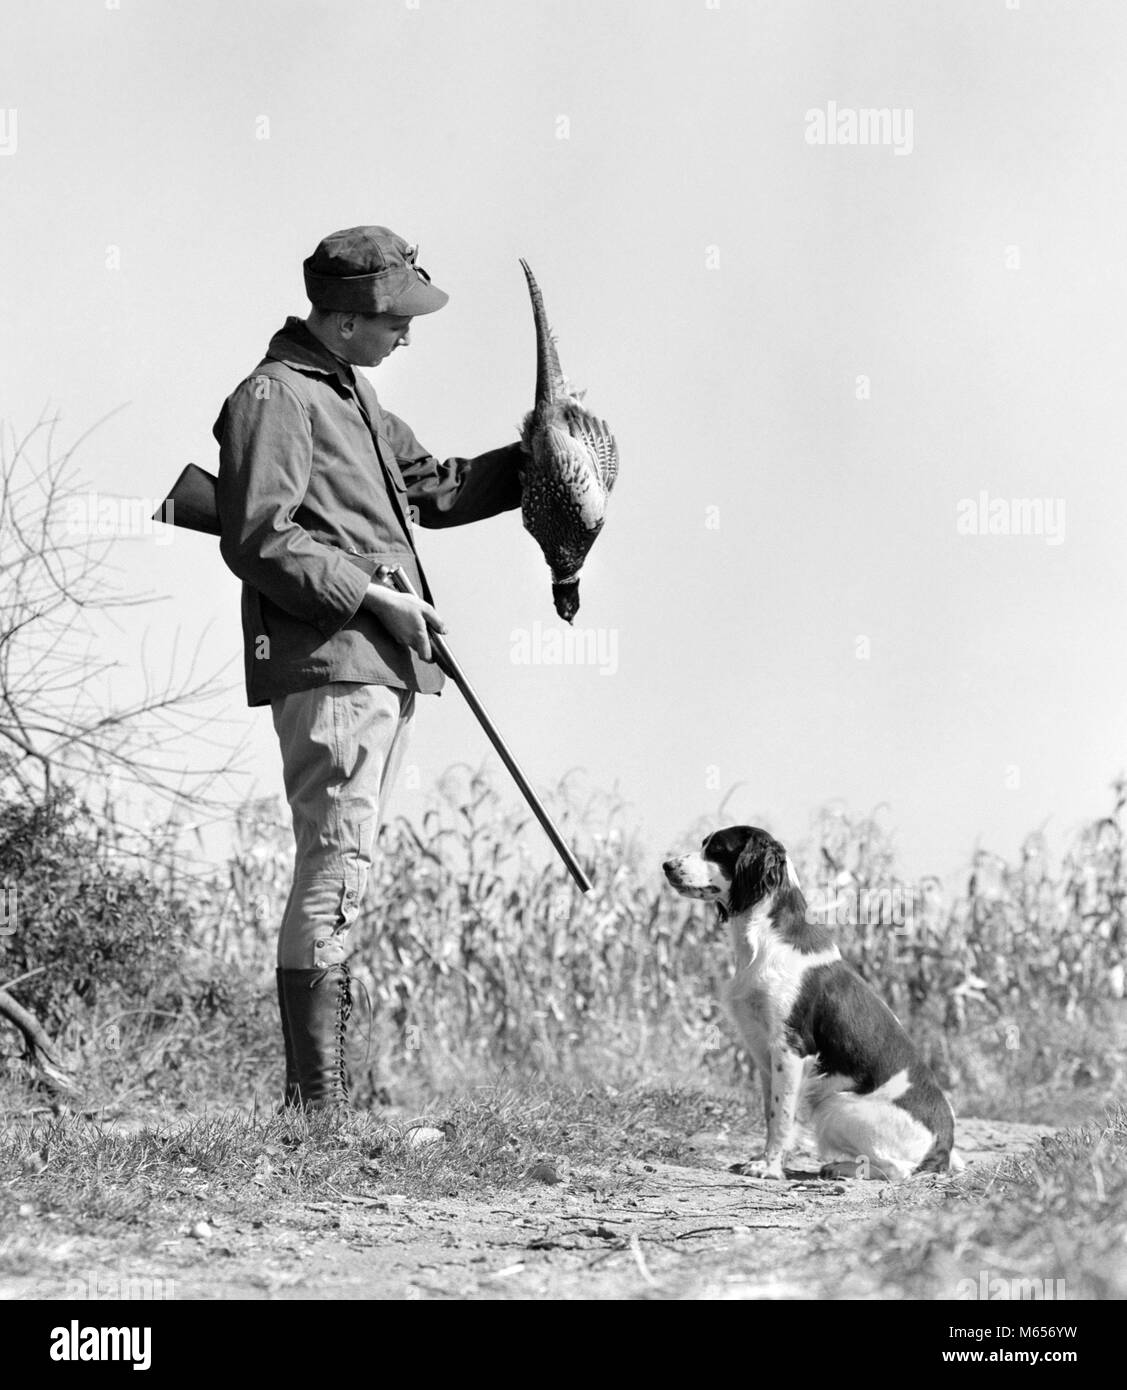 1940s YOUNG MAN HUNTER WITH SHOTGUN AND HUNTING DOG HOLDING BIRD PHEASANT - g487 HAR001 HARS FIREARMS GUNNING MALES MAMMAL MID-ADULT MID-ADULT MAN B&W BLACK AND WHITE CAUCASIAN ETHNICITY DOUBLE BAREL OLD FASHIONED PERSONS Stock Photo